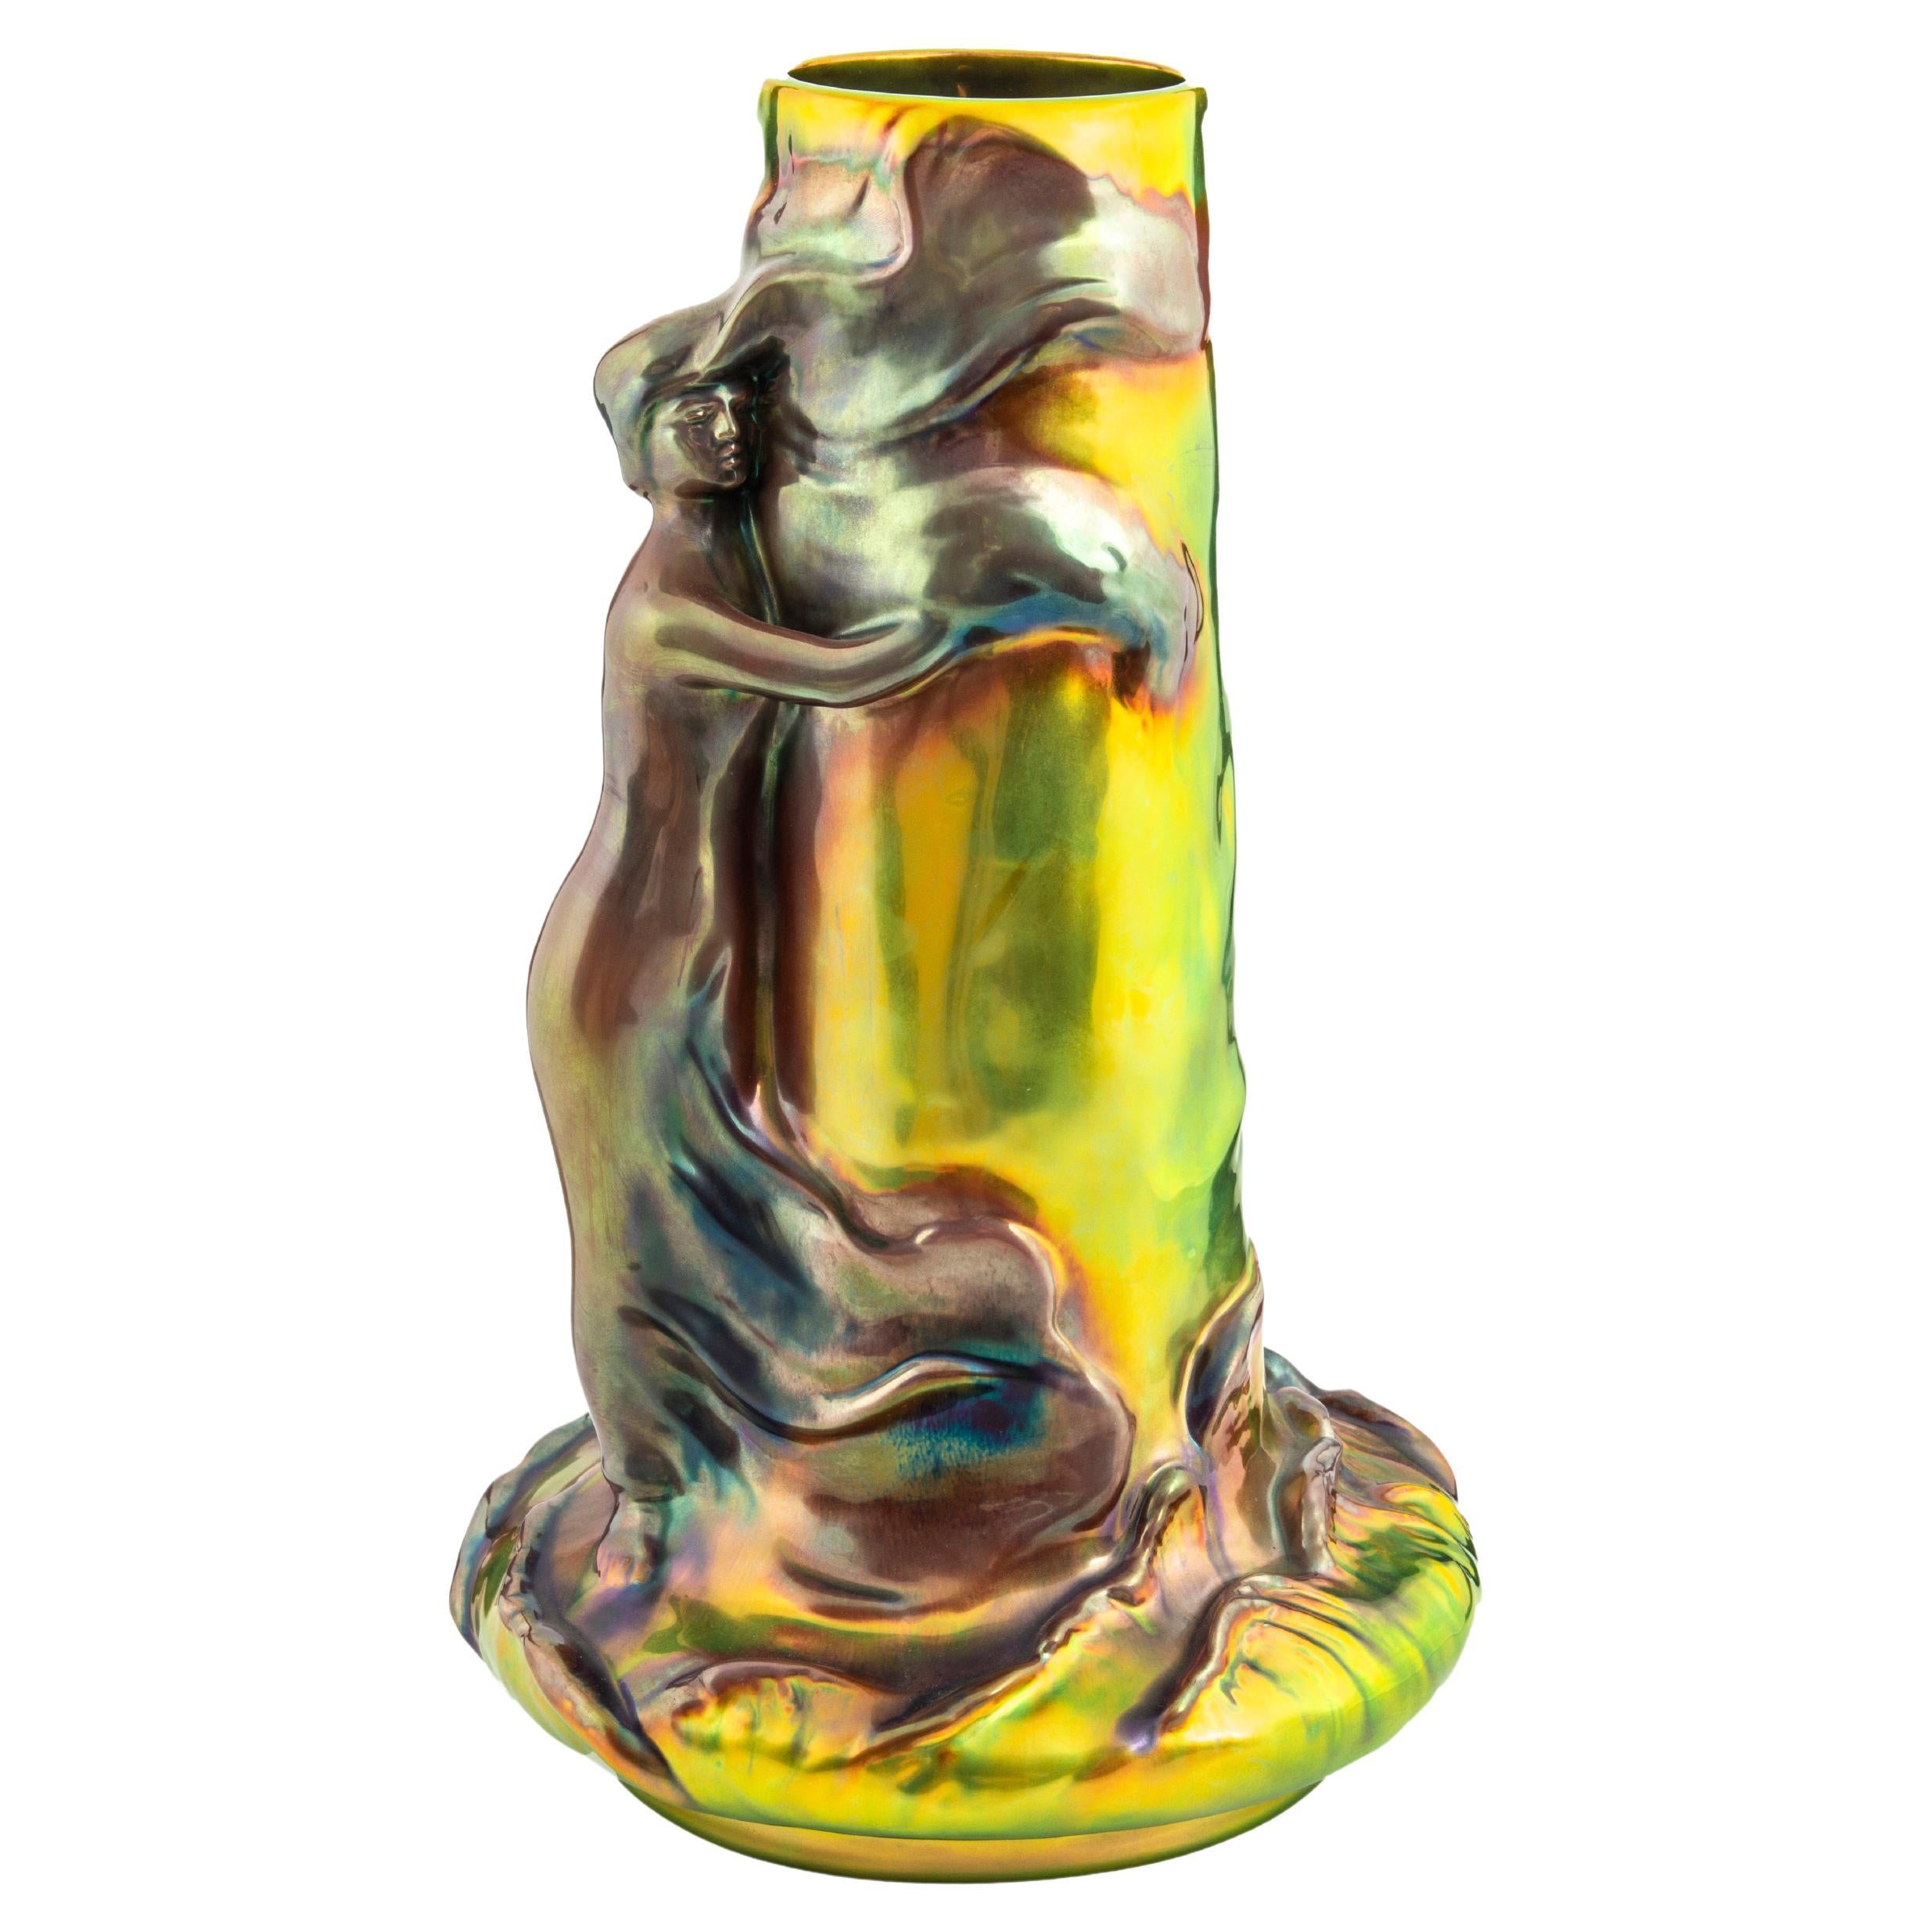 Zsolnay Decorative Vase - Woman in Storm